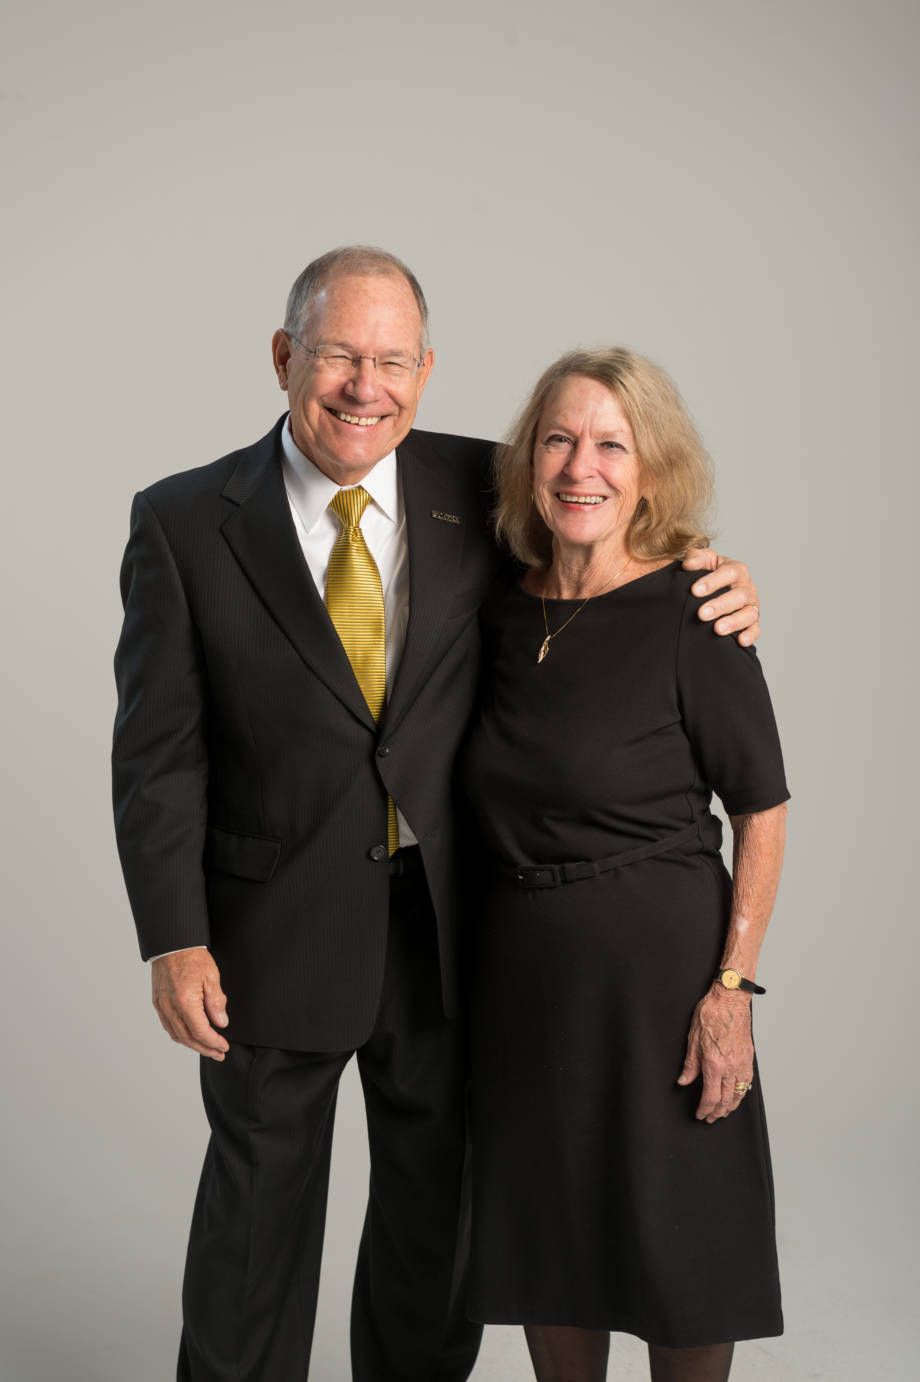 CAFNR Dean Tom Payne and his wife, Alice, have worked as a team during Tom's collective time as a either a professor or administrator at Texas A&M, Virginia Tech, Ohio State and Mizzou. Photo by L.G. Patterson.